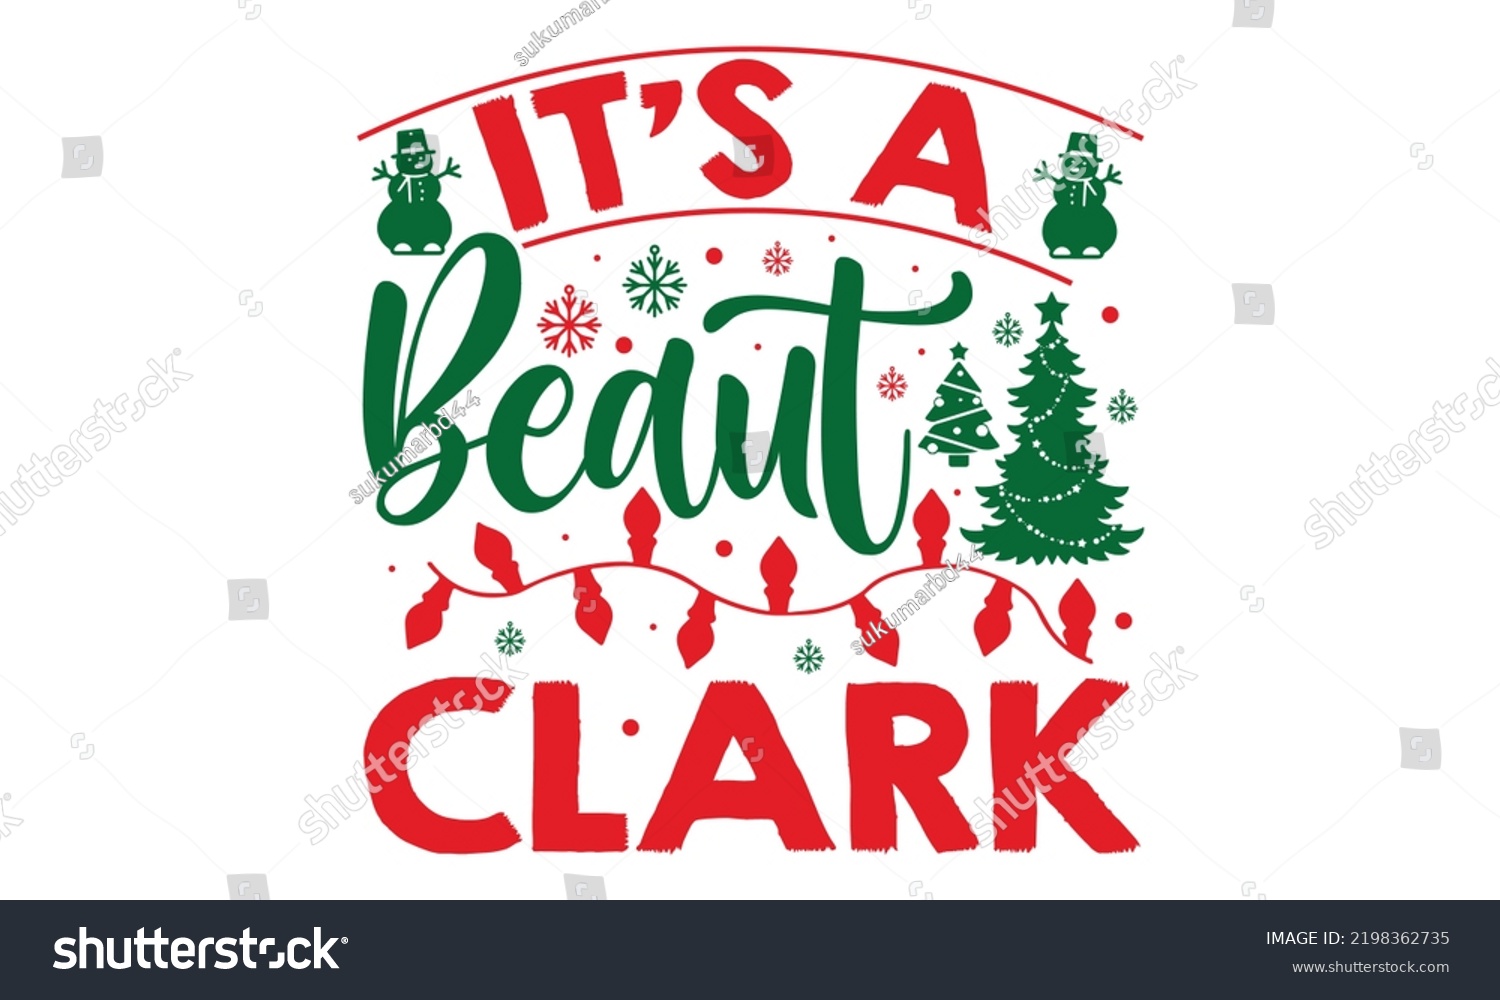 SVG of It’s A Beaut Clark - Christmas t-shirt design, Hand drawn lettering phrase, Calligraphy graphic design, SVG Files for Cutting Cricut and Silhouette svg